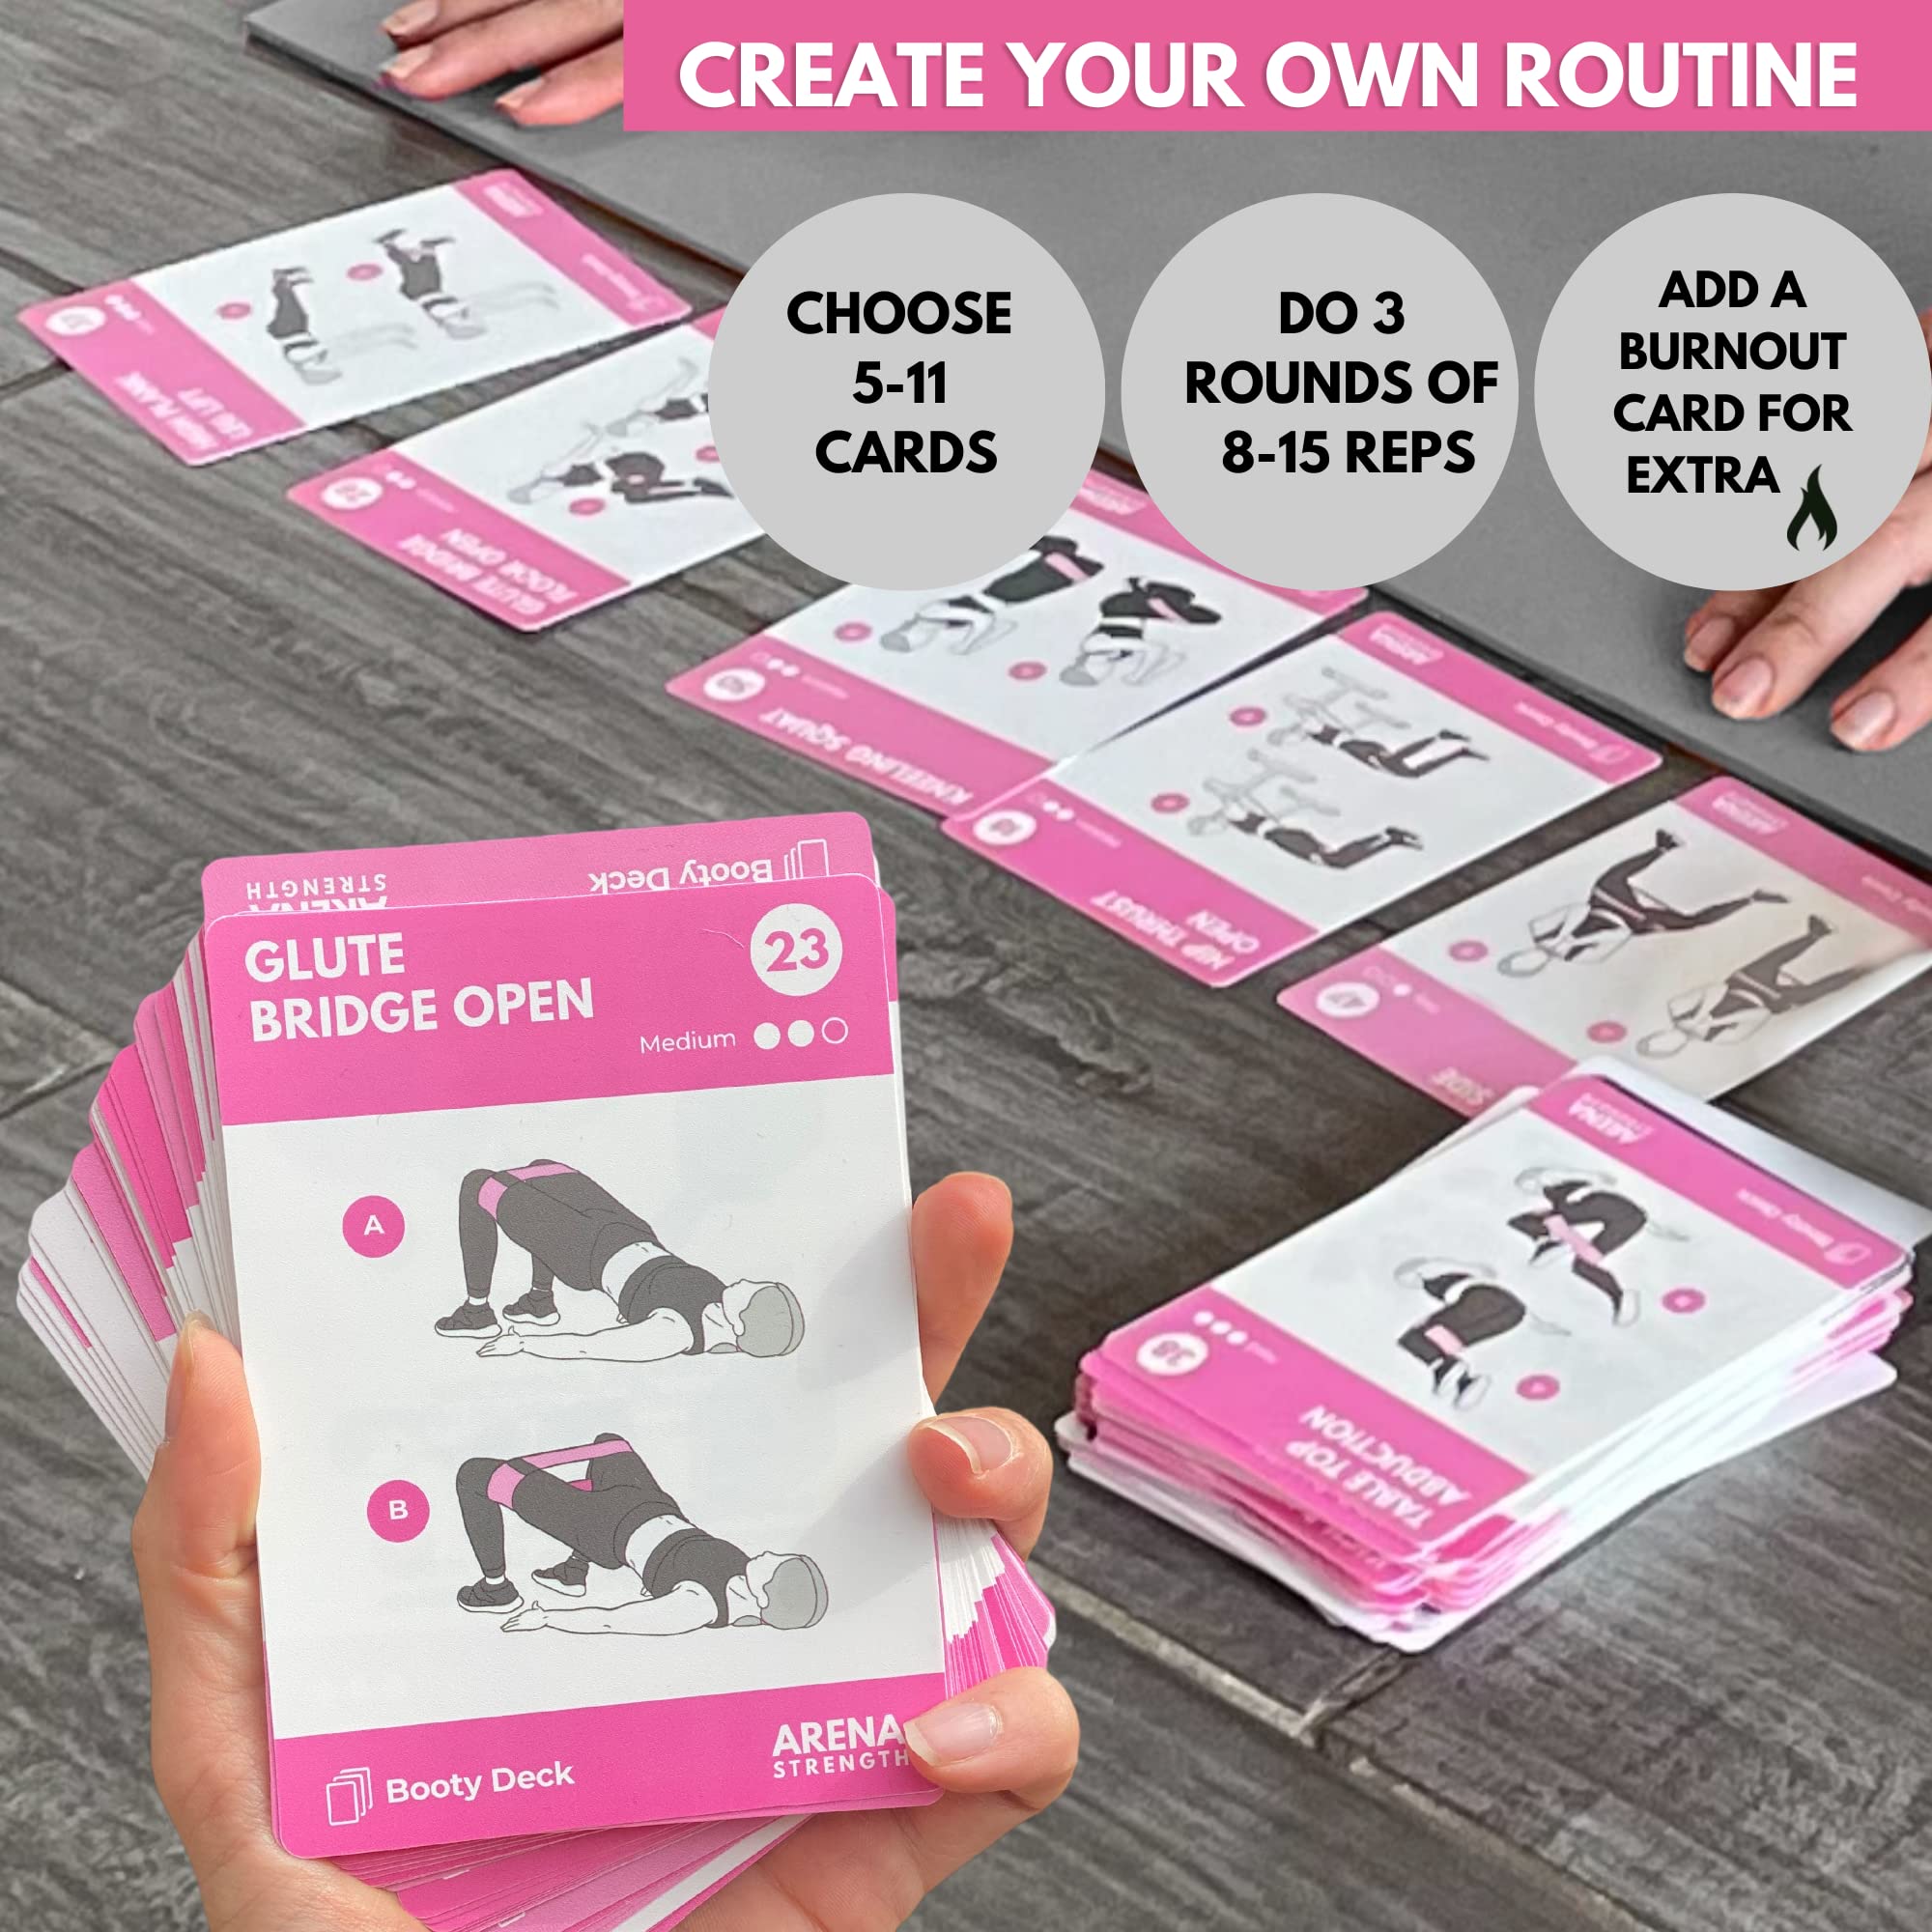 Arena Strength Booty Fitness Workout Cards- Instructional Fitness Deck for Booty Band Workouts, Beginner Fitness Guide for Resistance Band Training Exercises at Home. Includes Workout Routines.